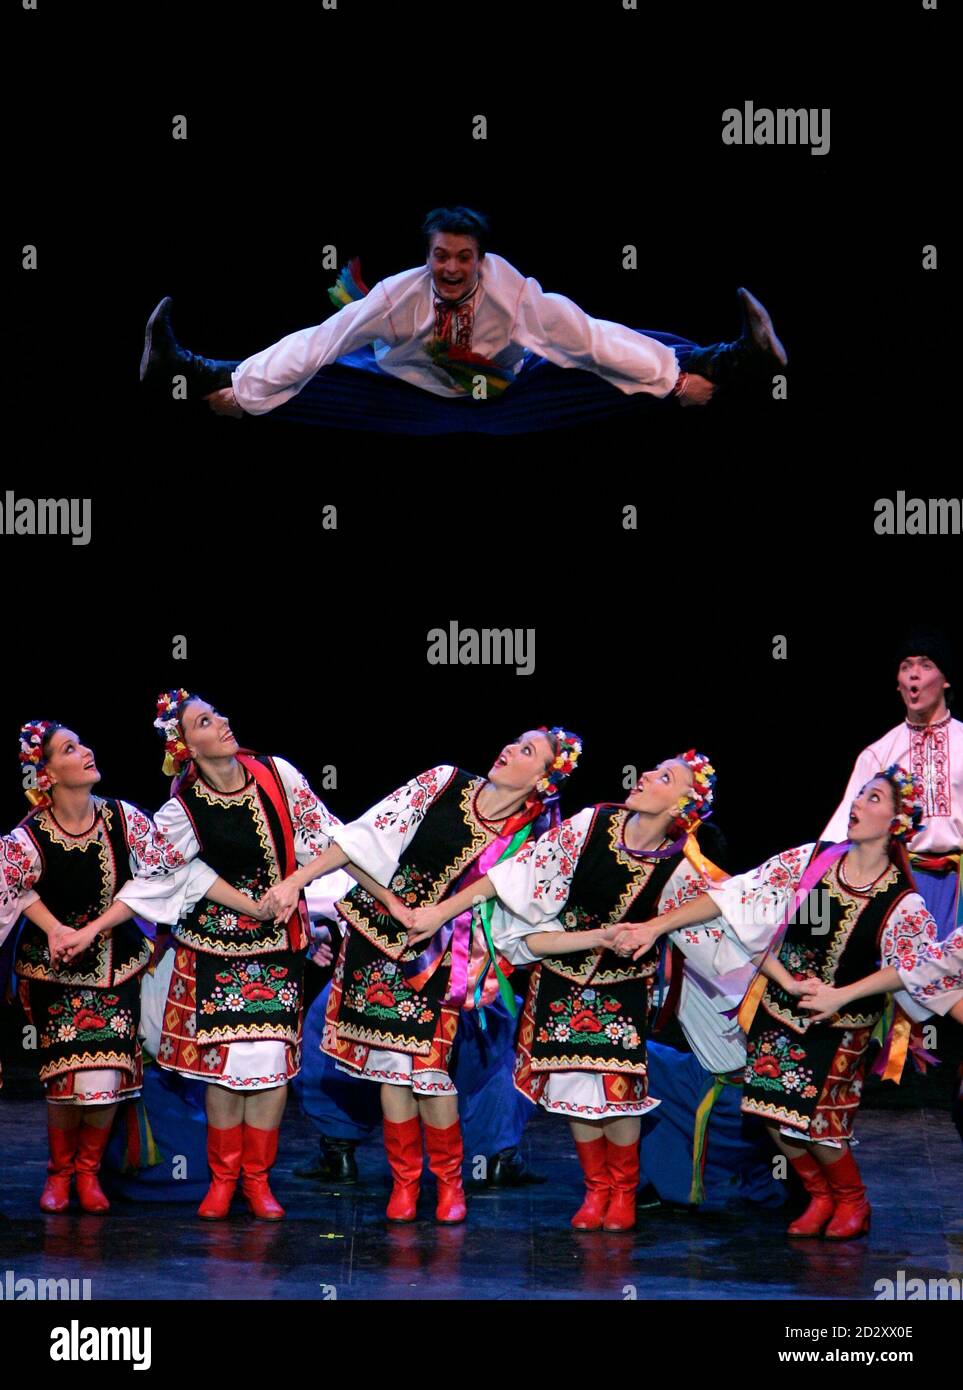 Dancers perform on stage during the "Igor Moiseyev Ballet Tour" in Budapest  November 23, 2008. REUTERS/Karoly Arvai (HUNGARY Stock Photo - Alamy